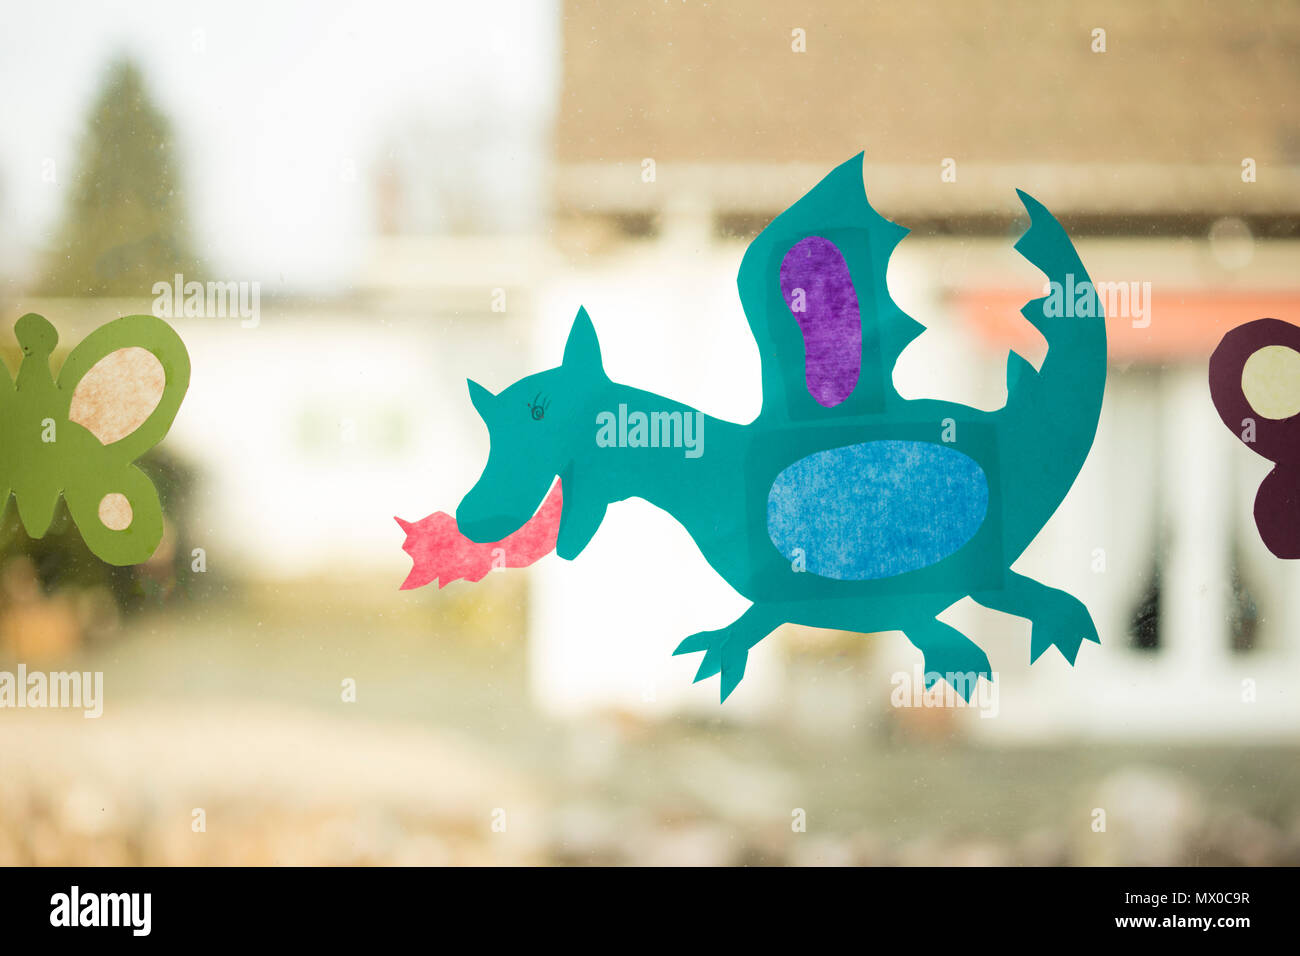 shape of a dragon made with paper as handicraft activity for children and placed on window glass. Stock Photo